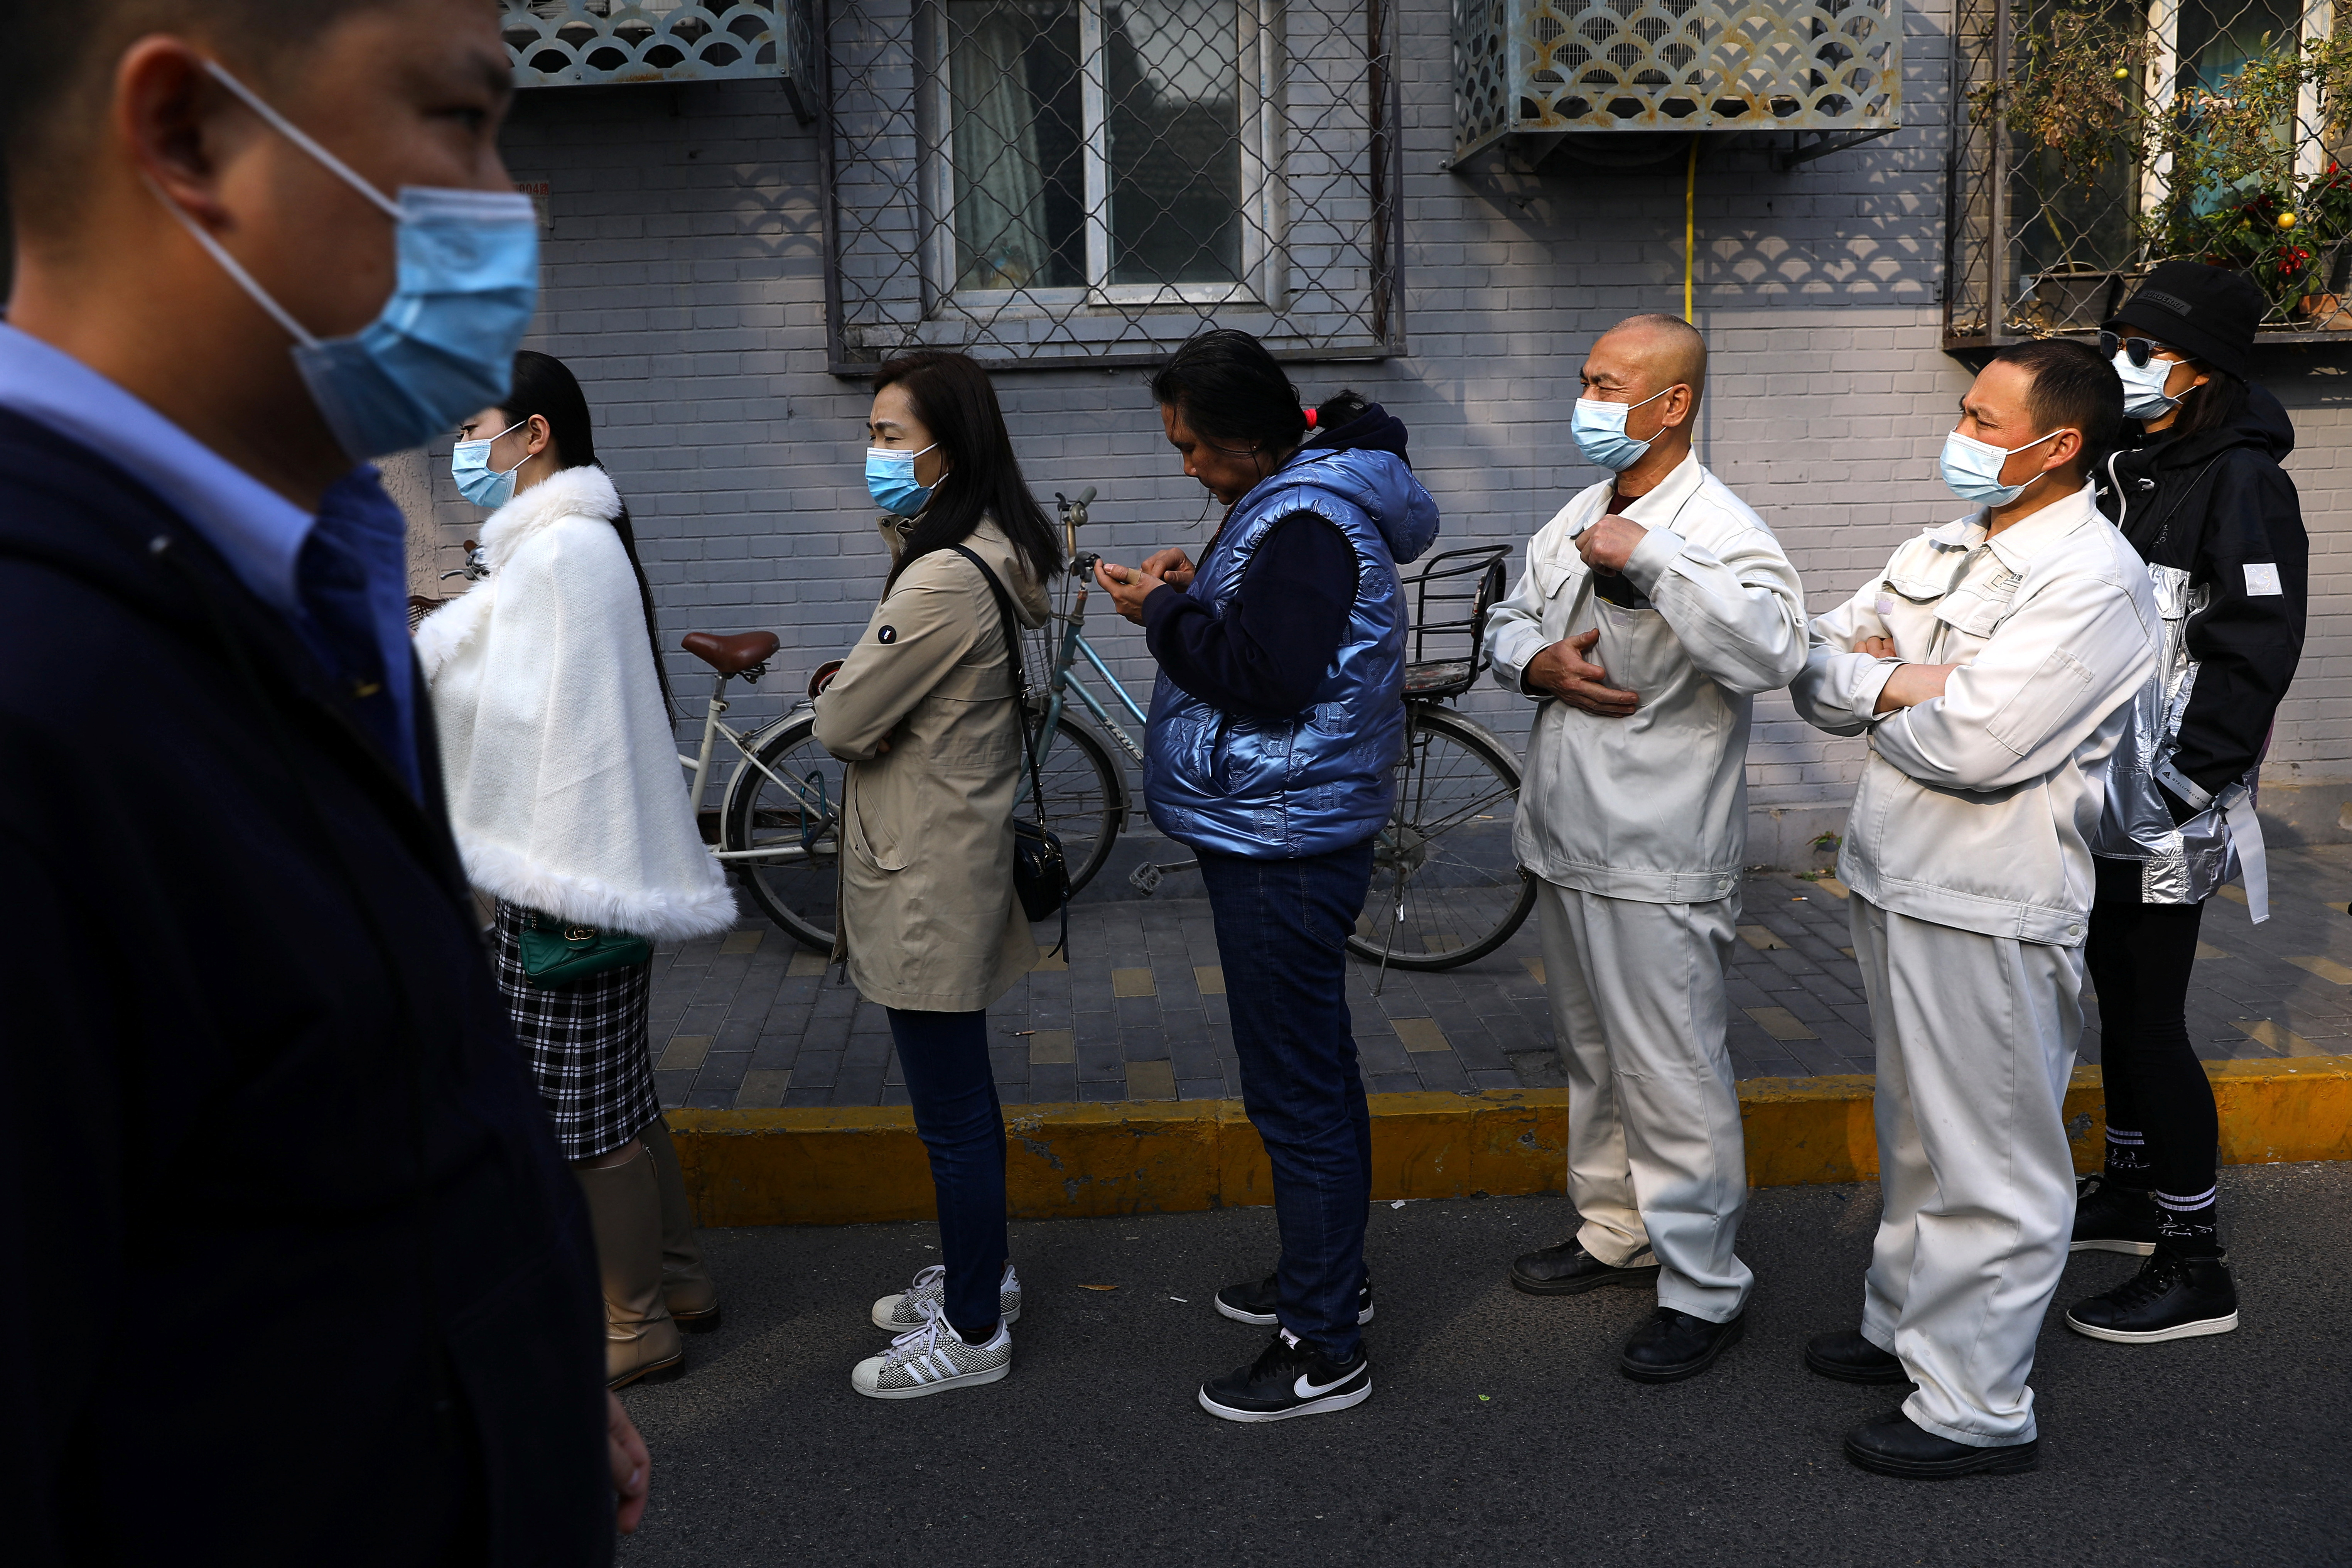 Booster shots of COVID-19 vaccine being offered to vaccinated residents, in Beijing